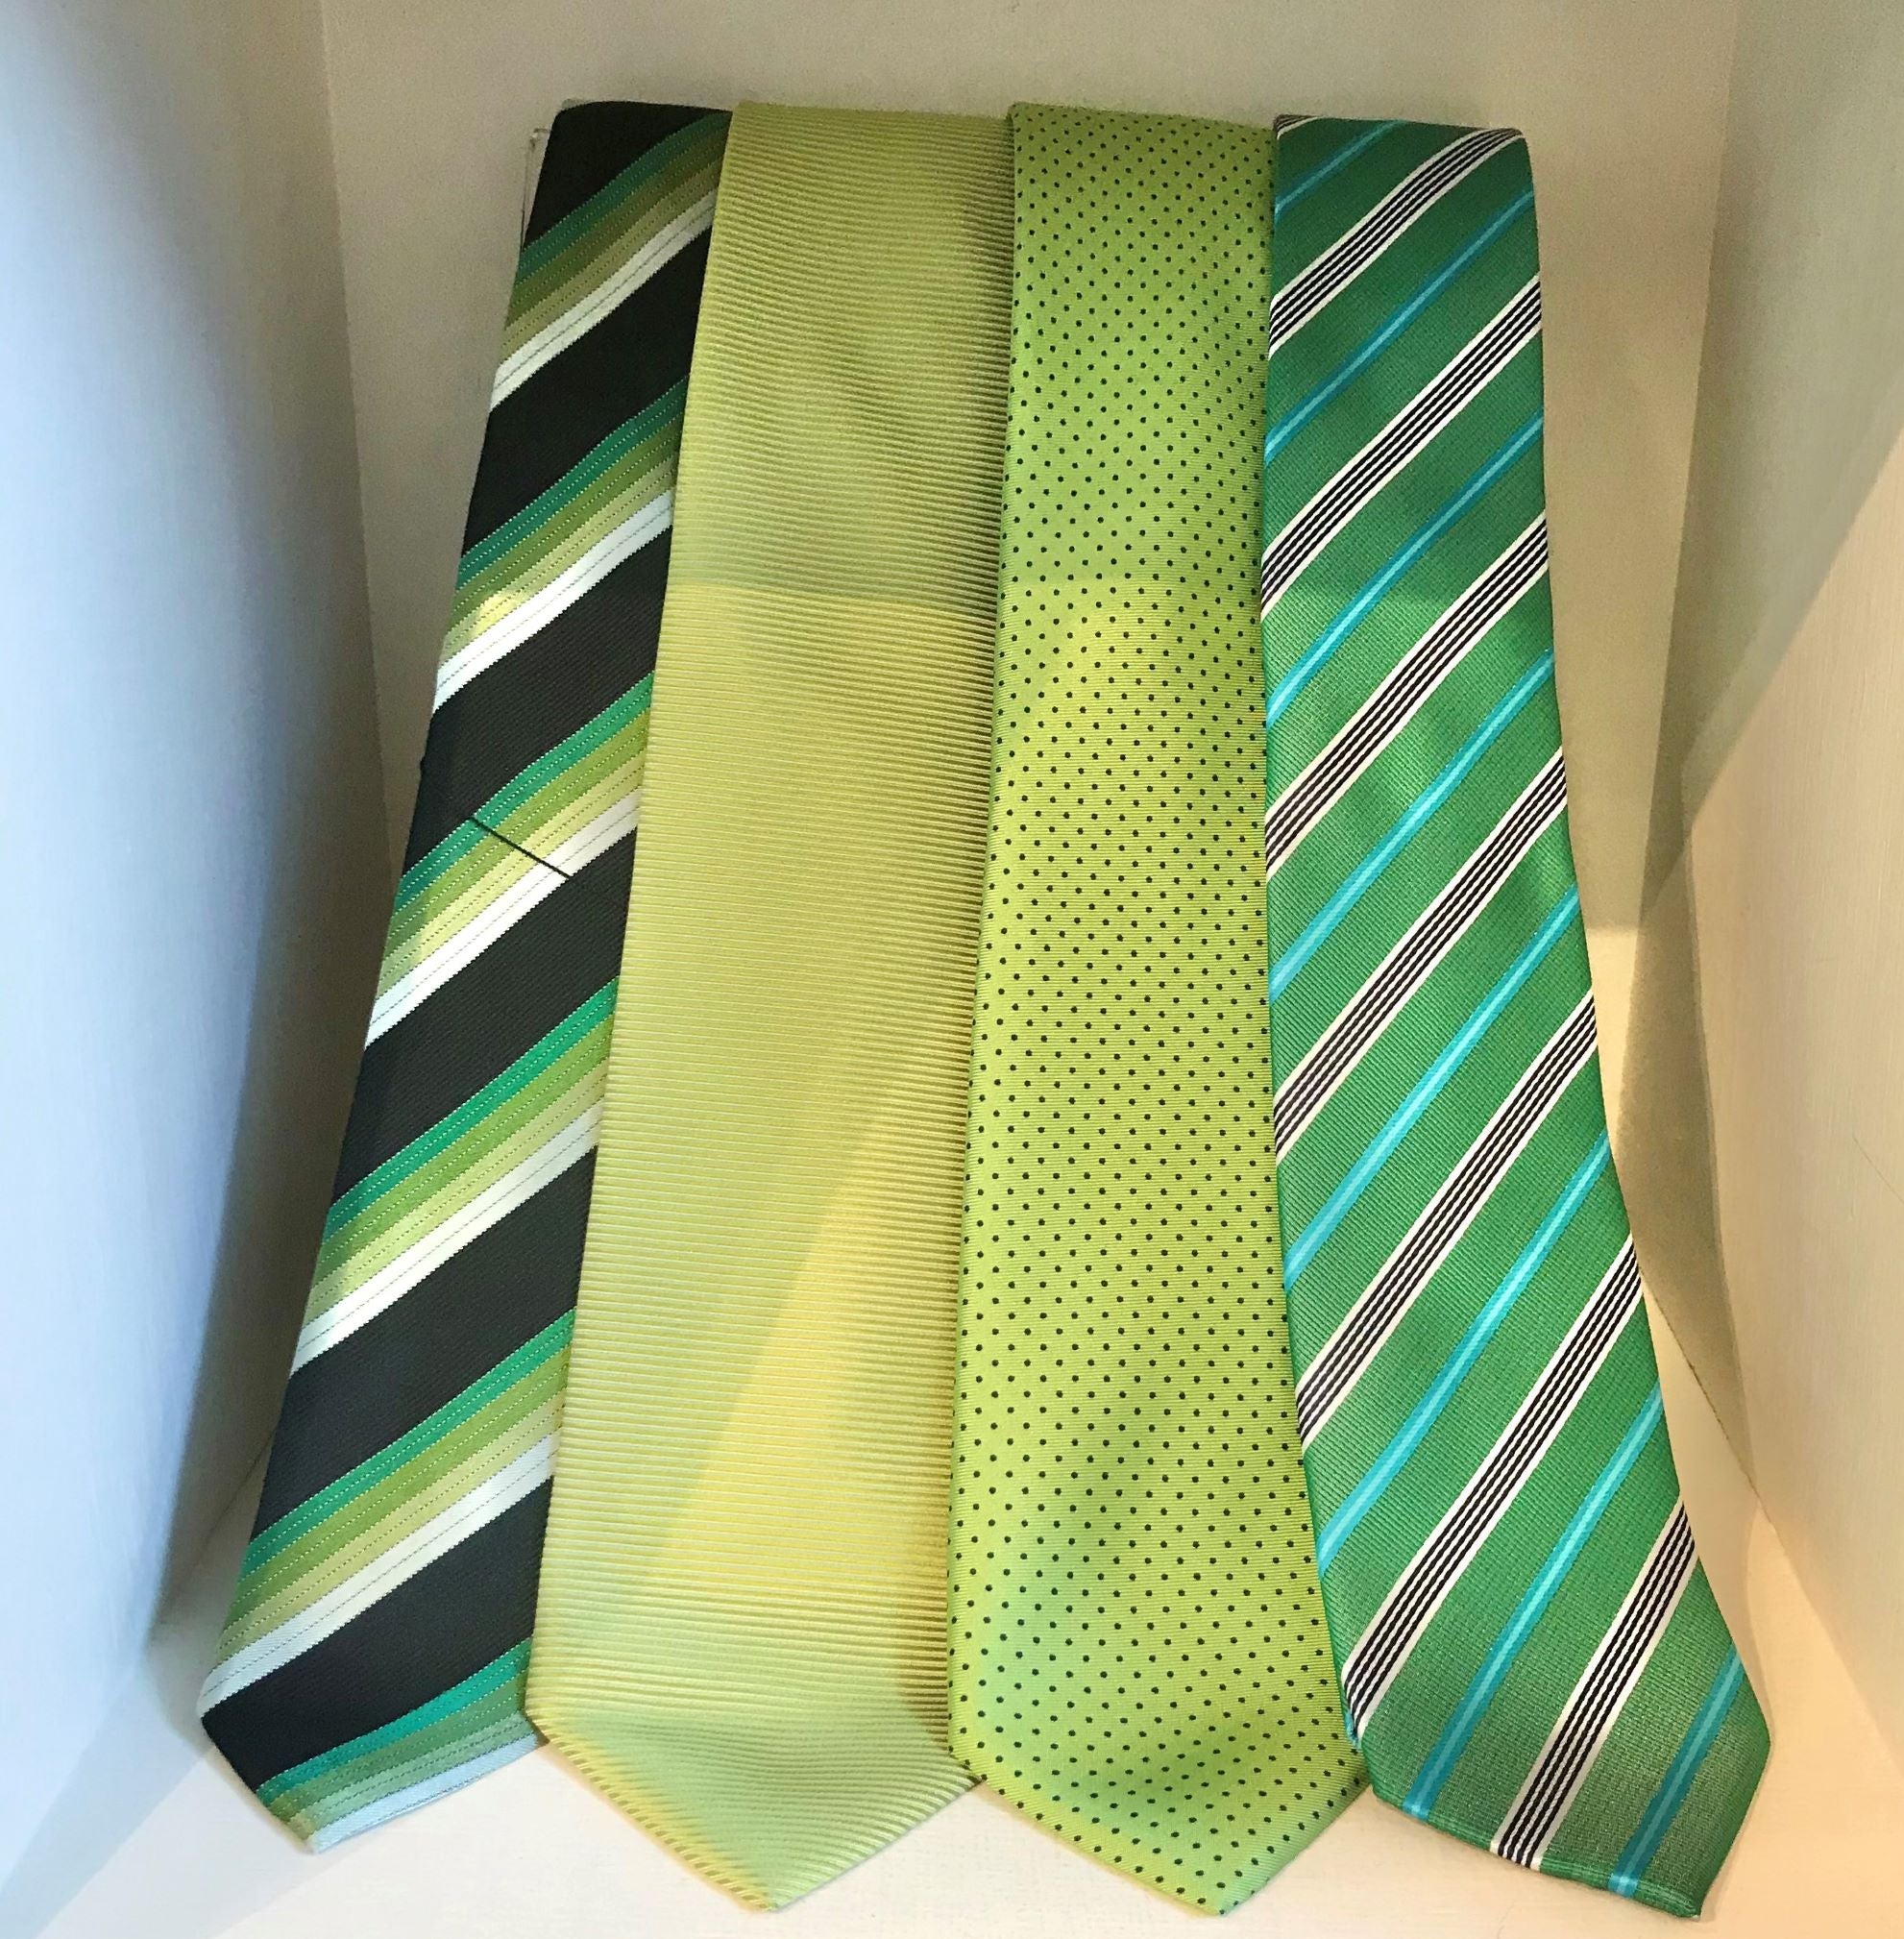 Selection Of Ties